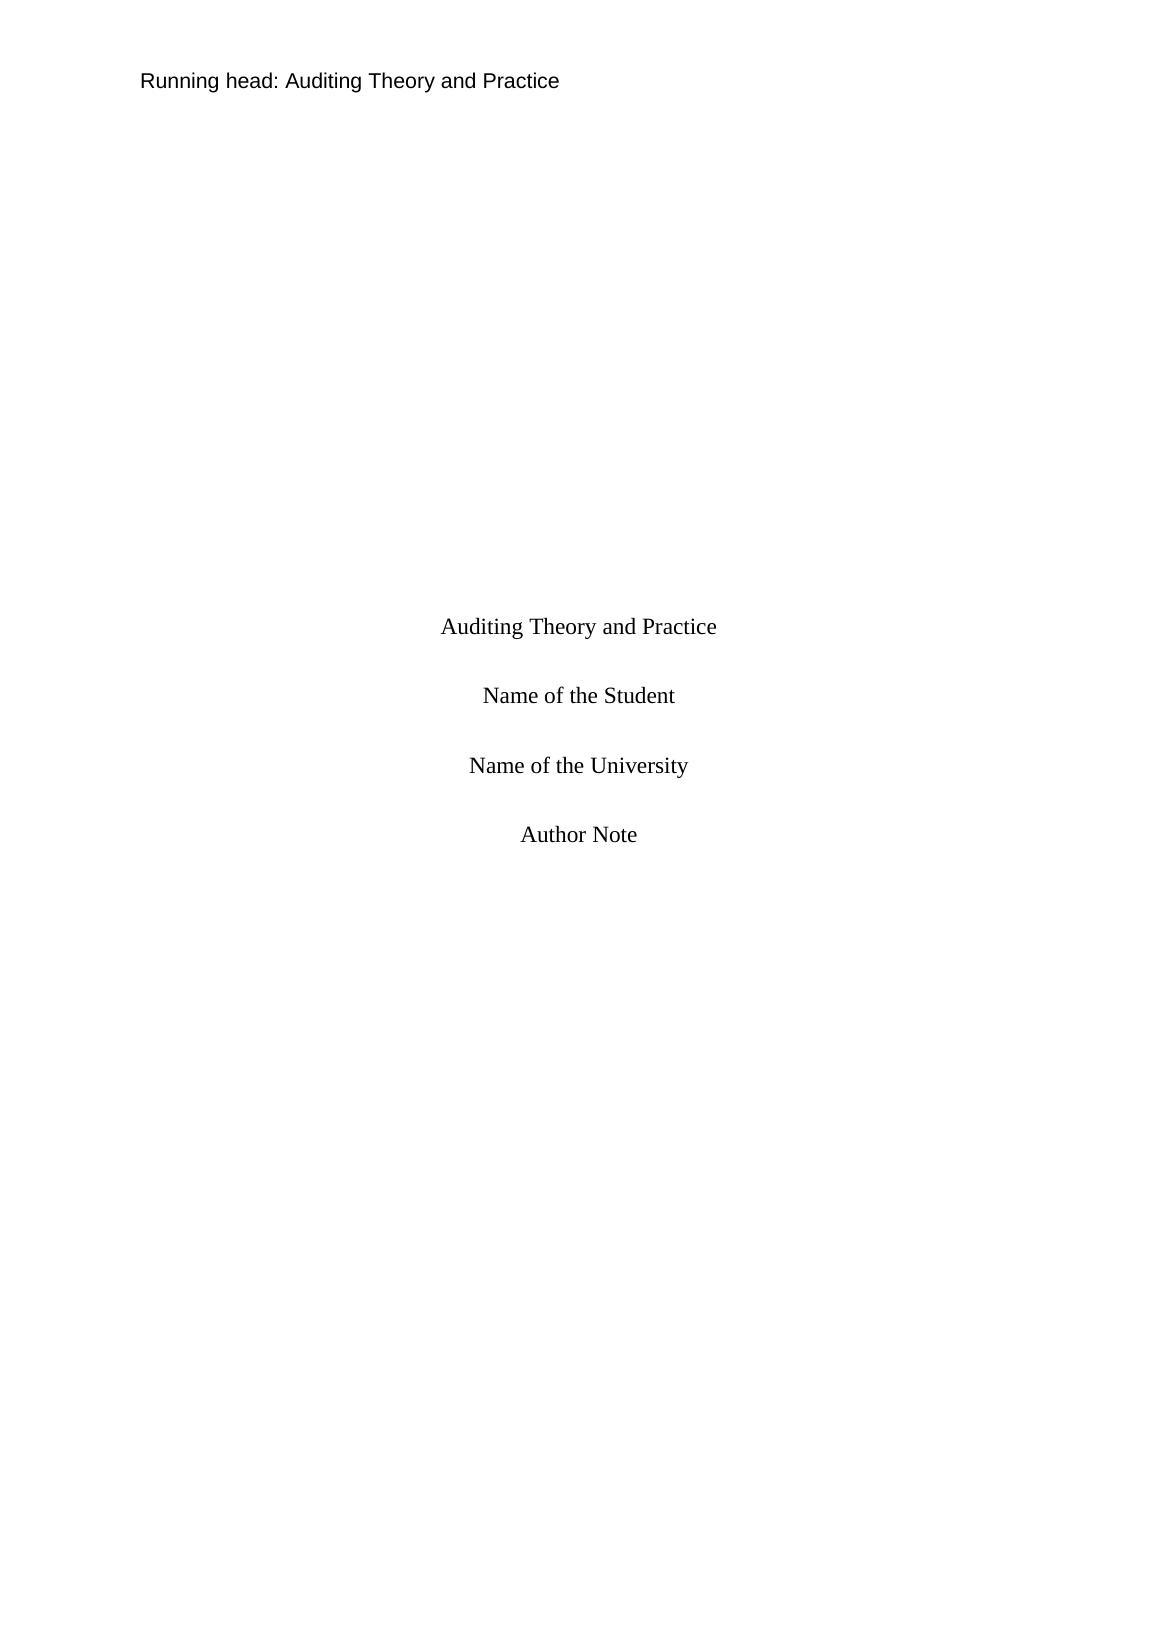 Auditing Theory and Practice_1